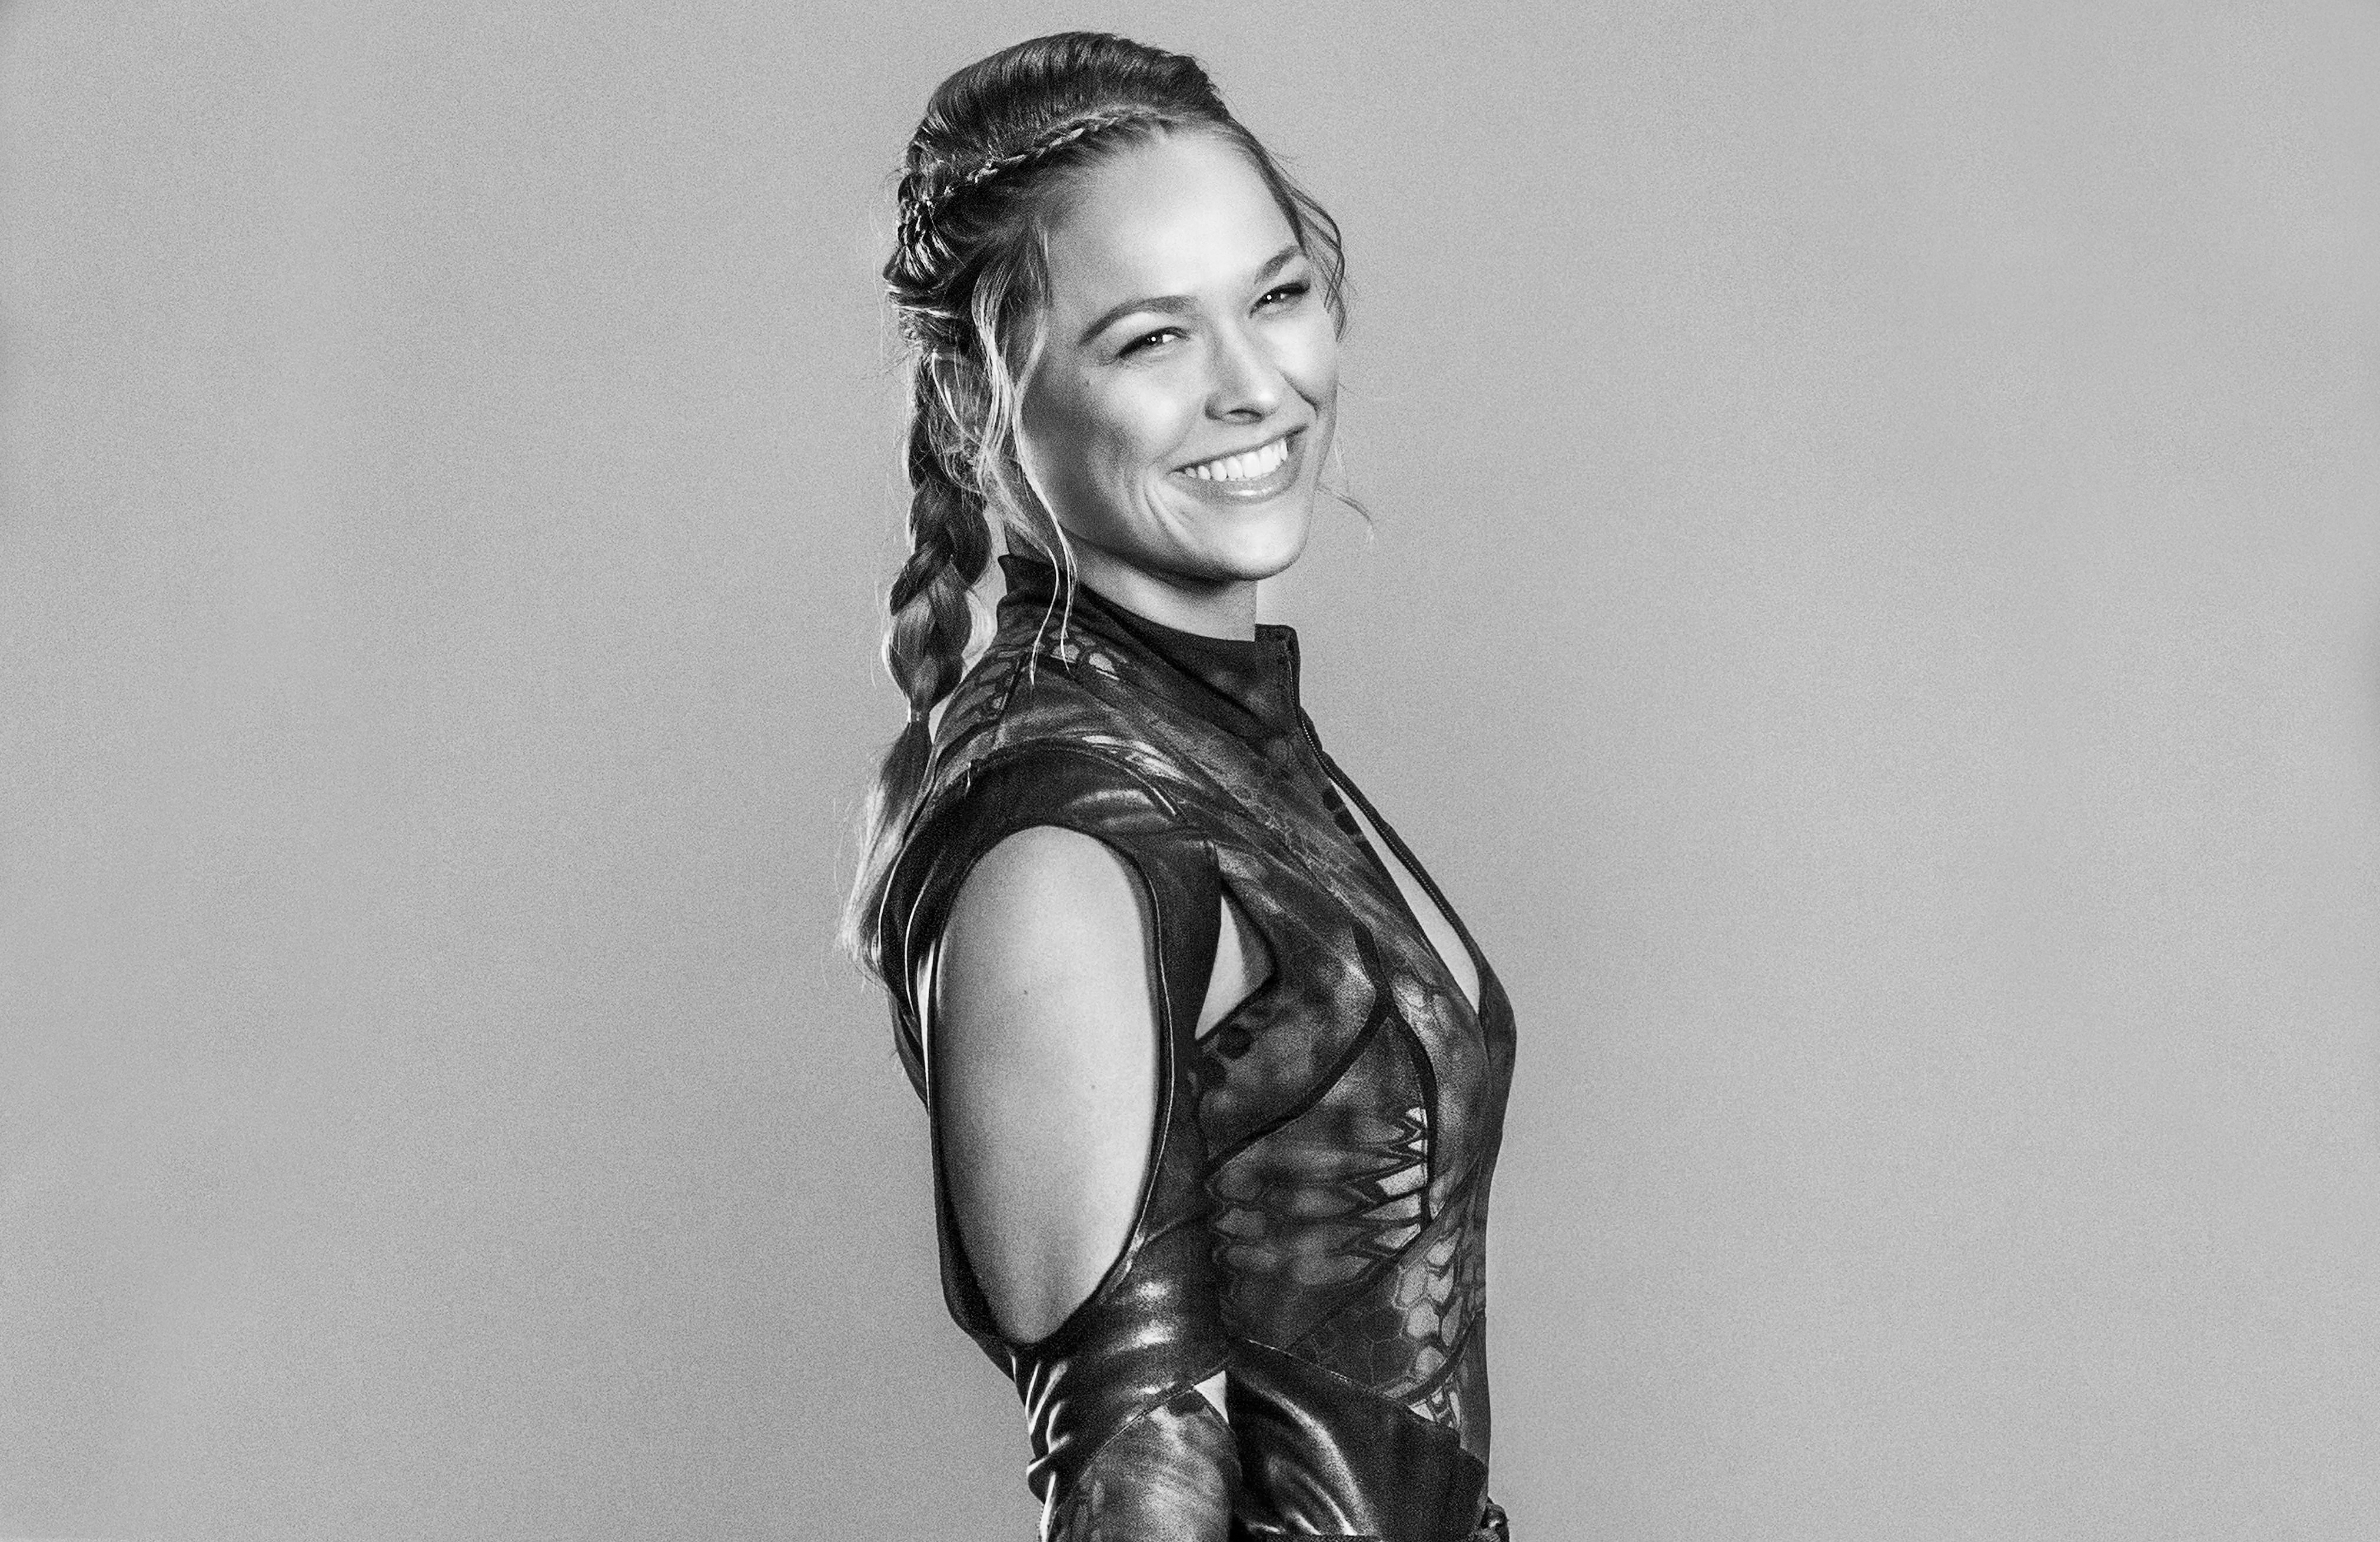 ronda rousey, movie, the expendables 3, luna (the expendables), the expendables 4K Ultra